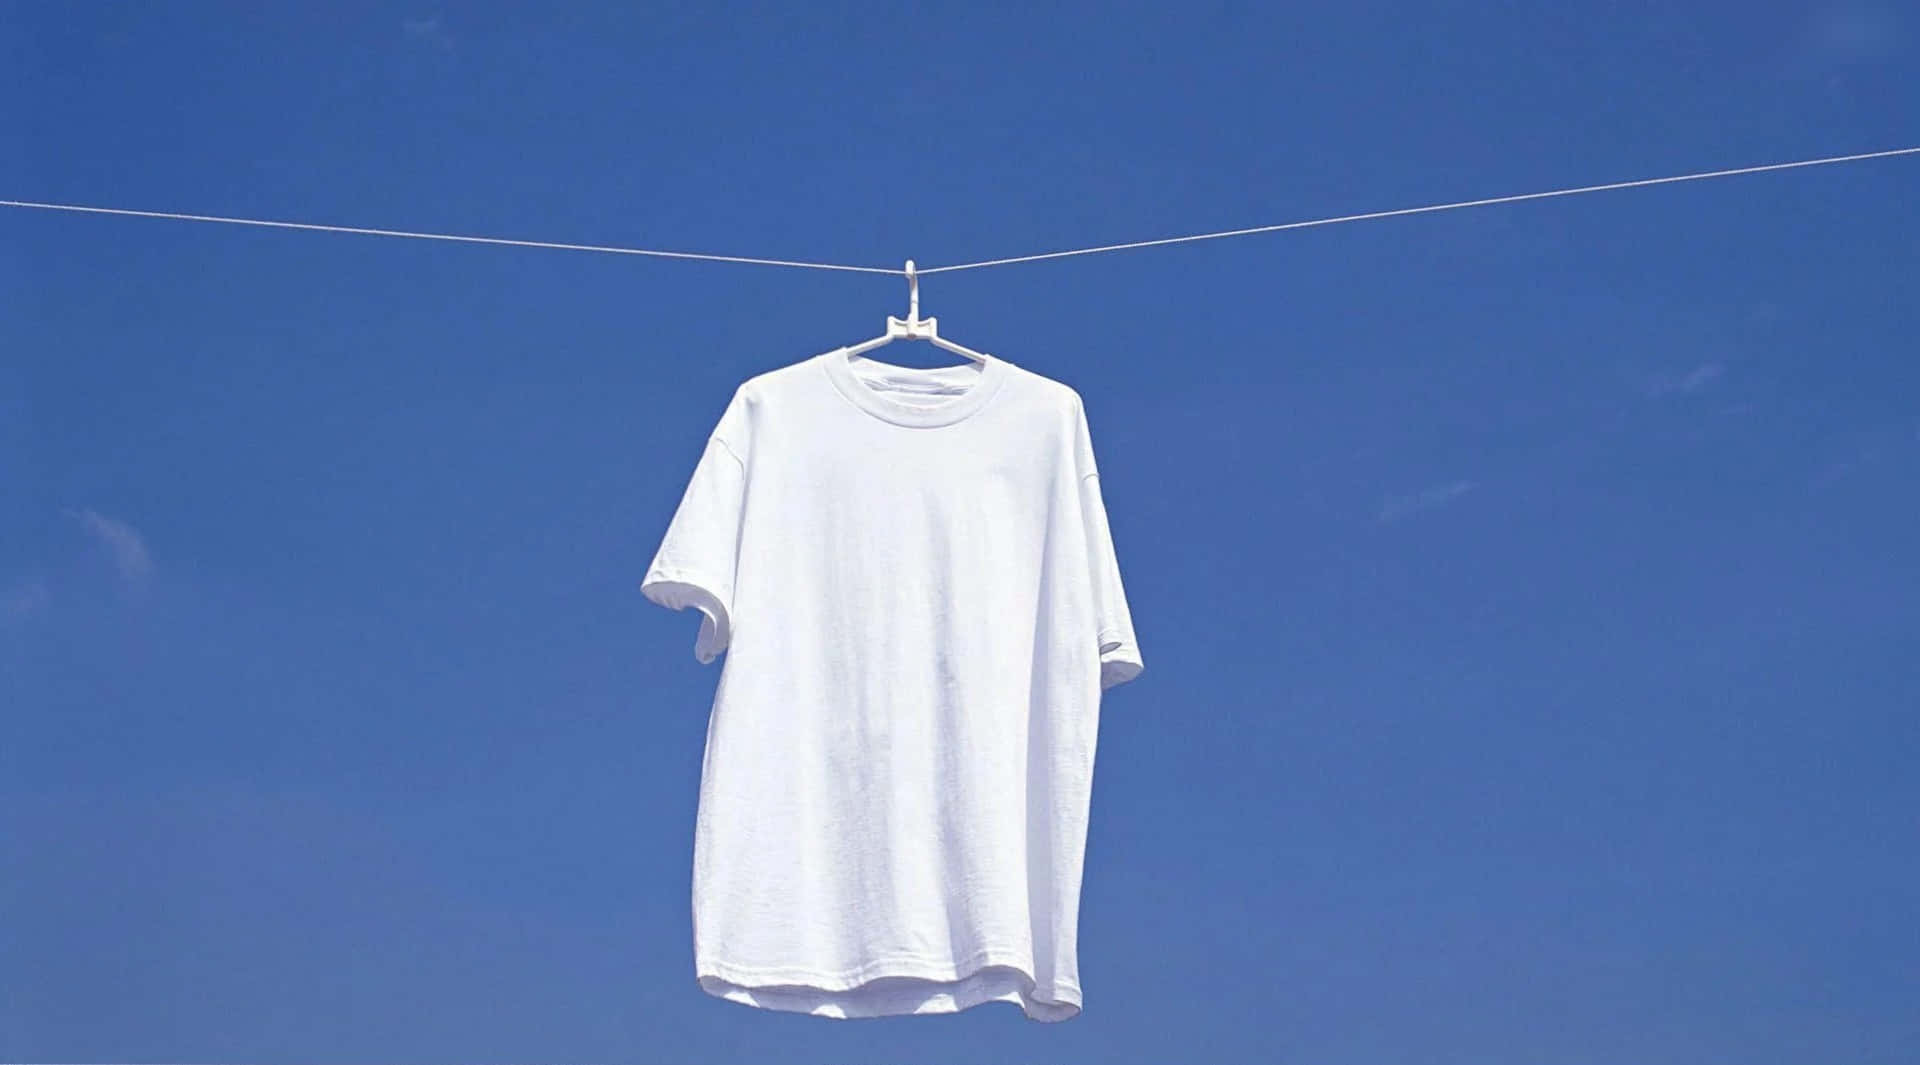 White Shirt Hanging On Clothes Line